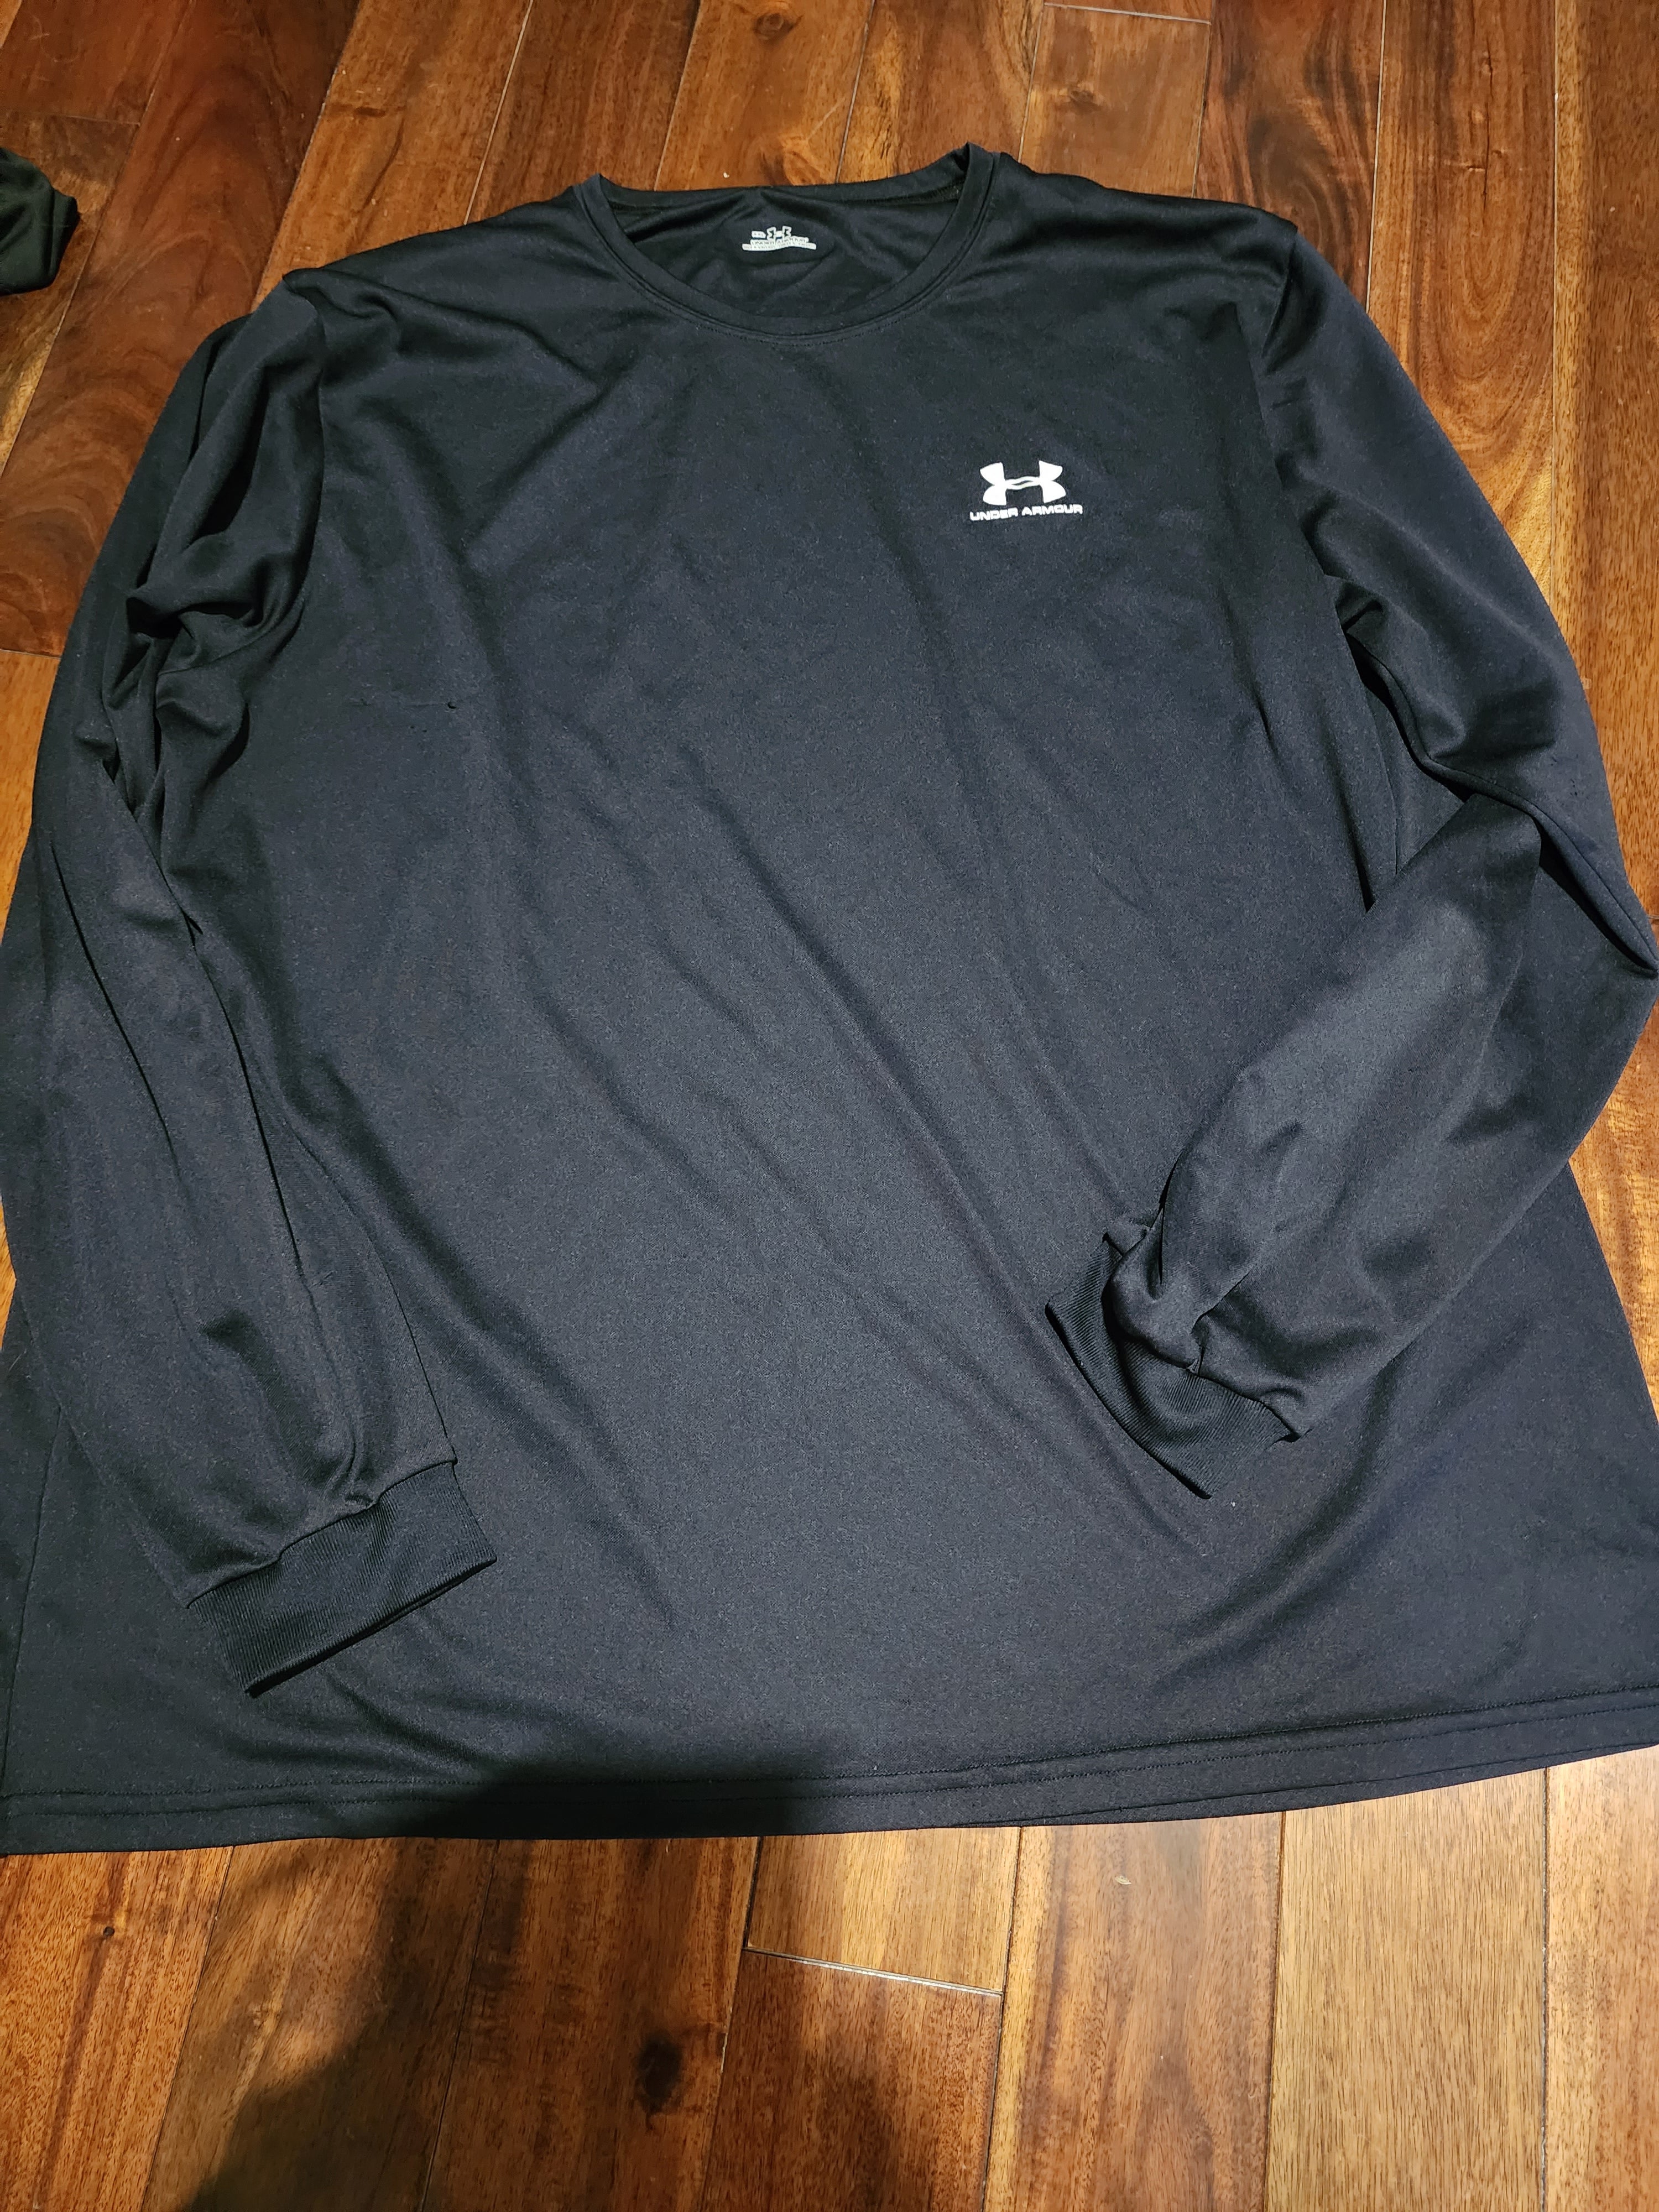 Black Men's XXL Under Armour Compression Heat Gear NHL Issued for